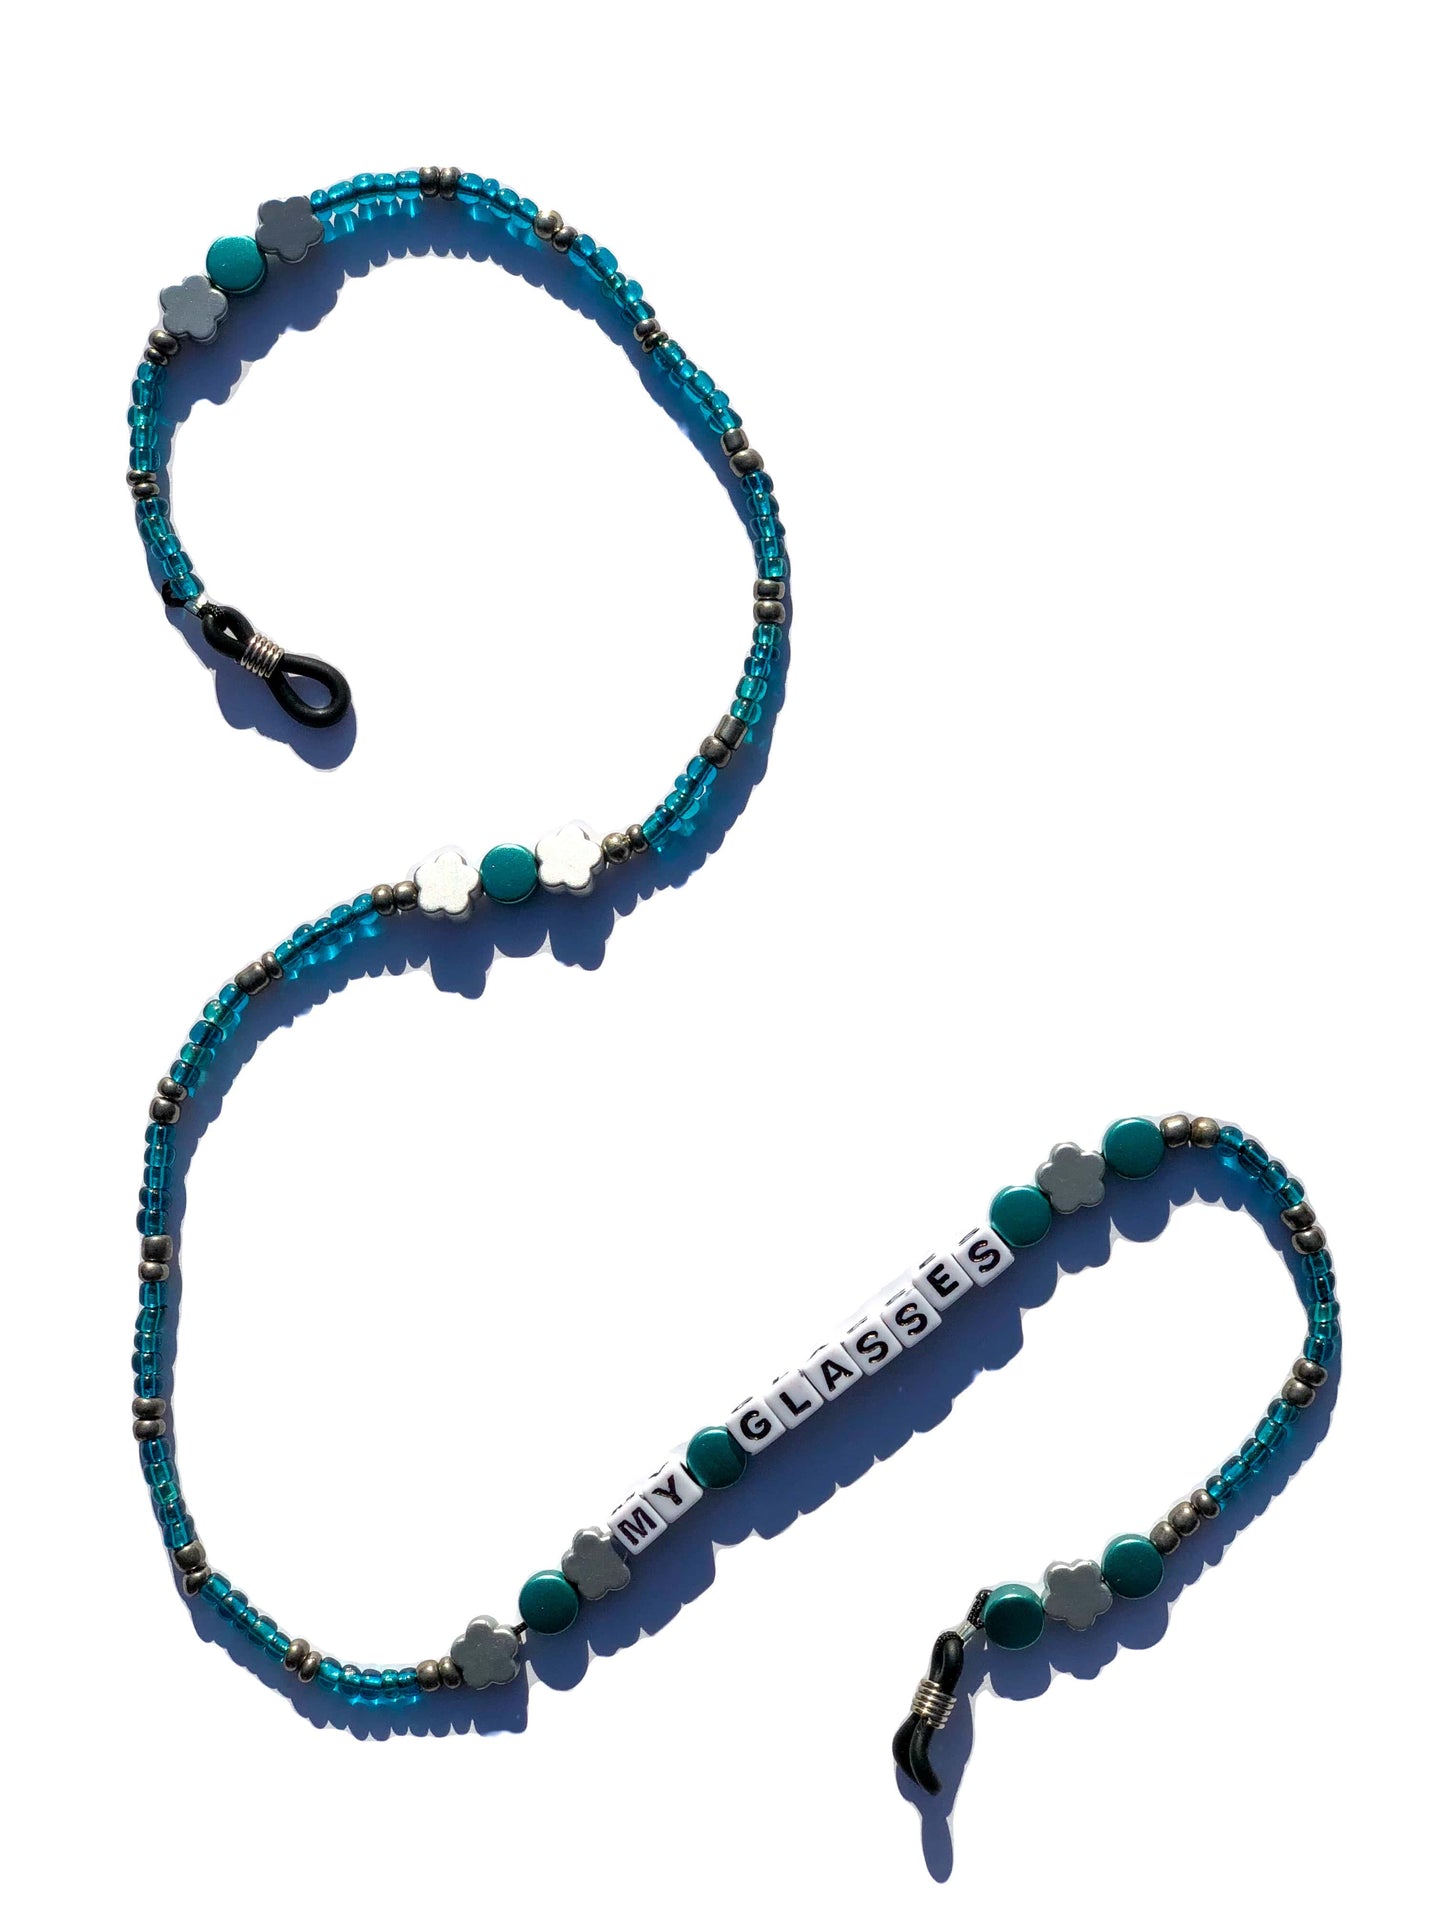 handcrafted grey and blue glass and charm beaded glasses strap with lettered beads. 